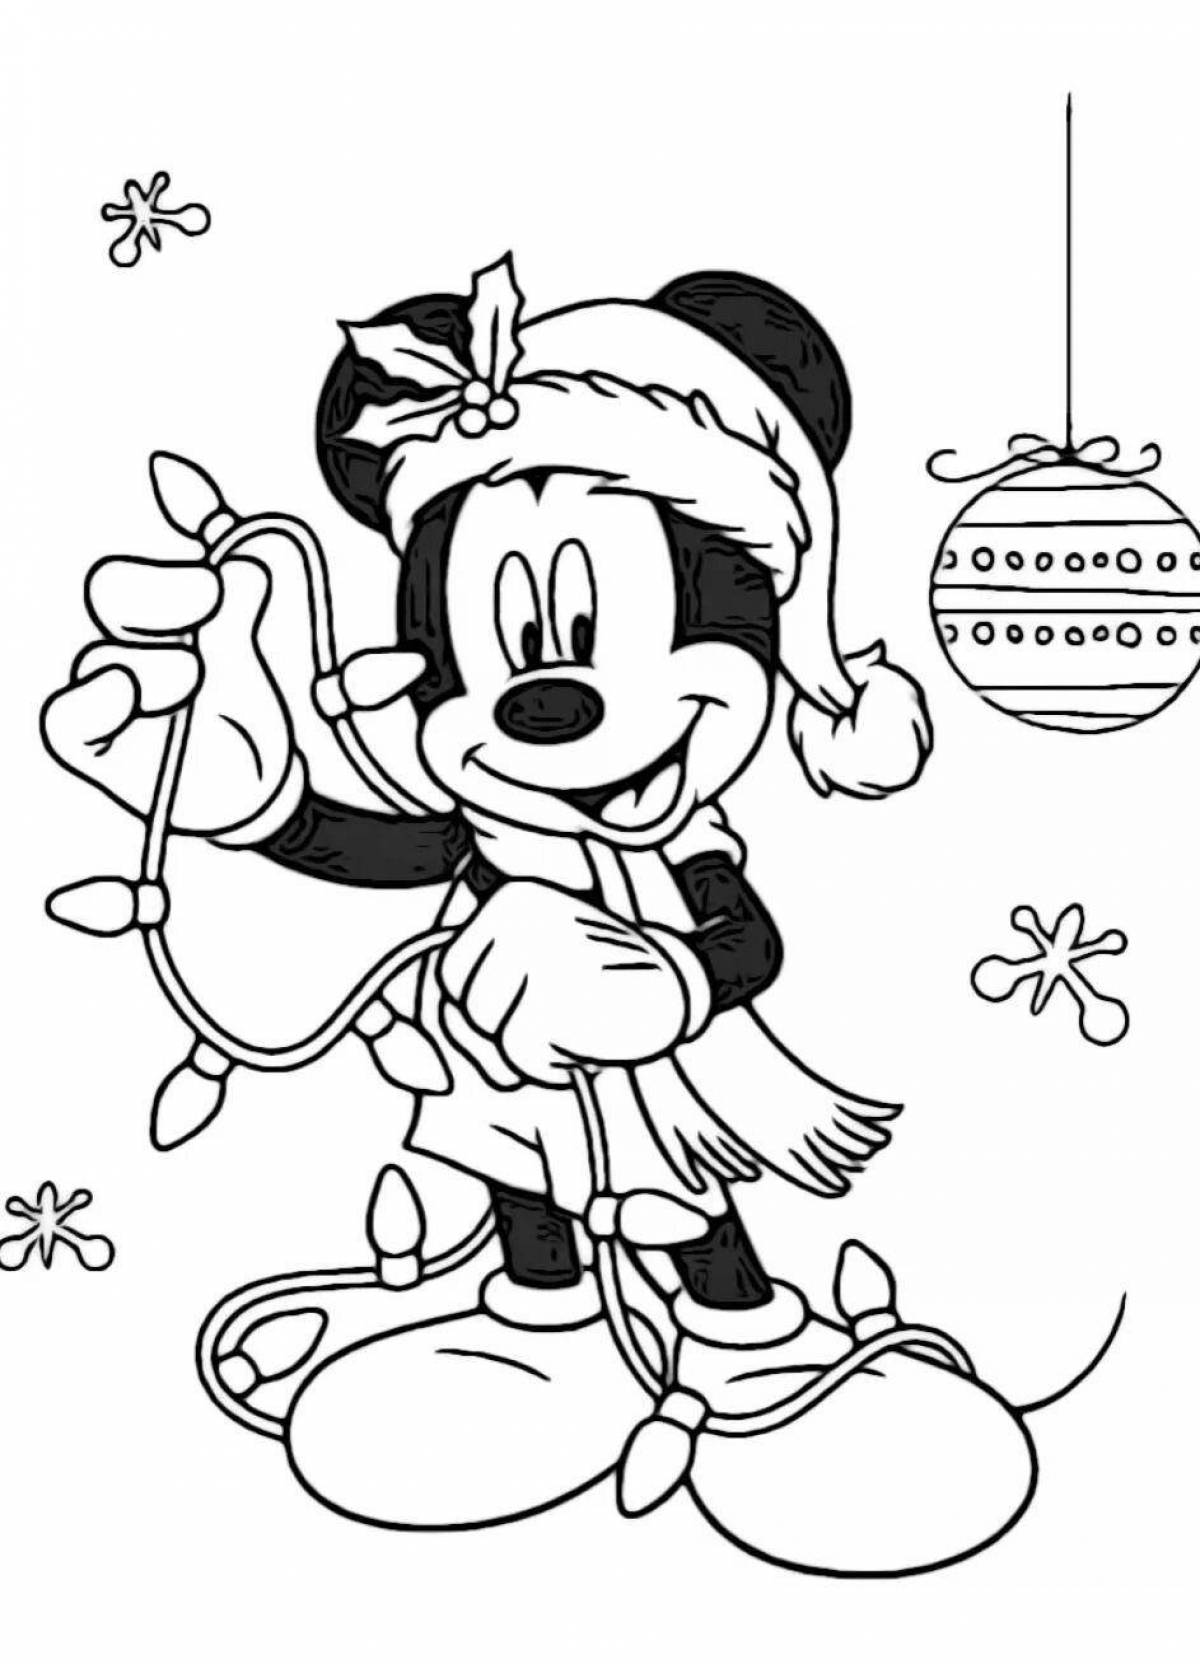 Mickey mouse colorful Christmas coloring book